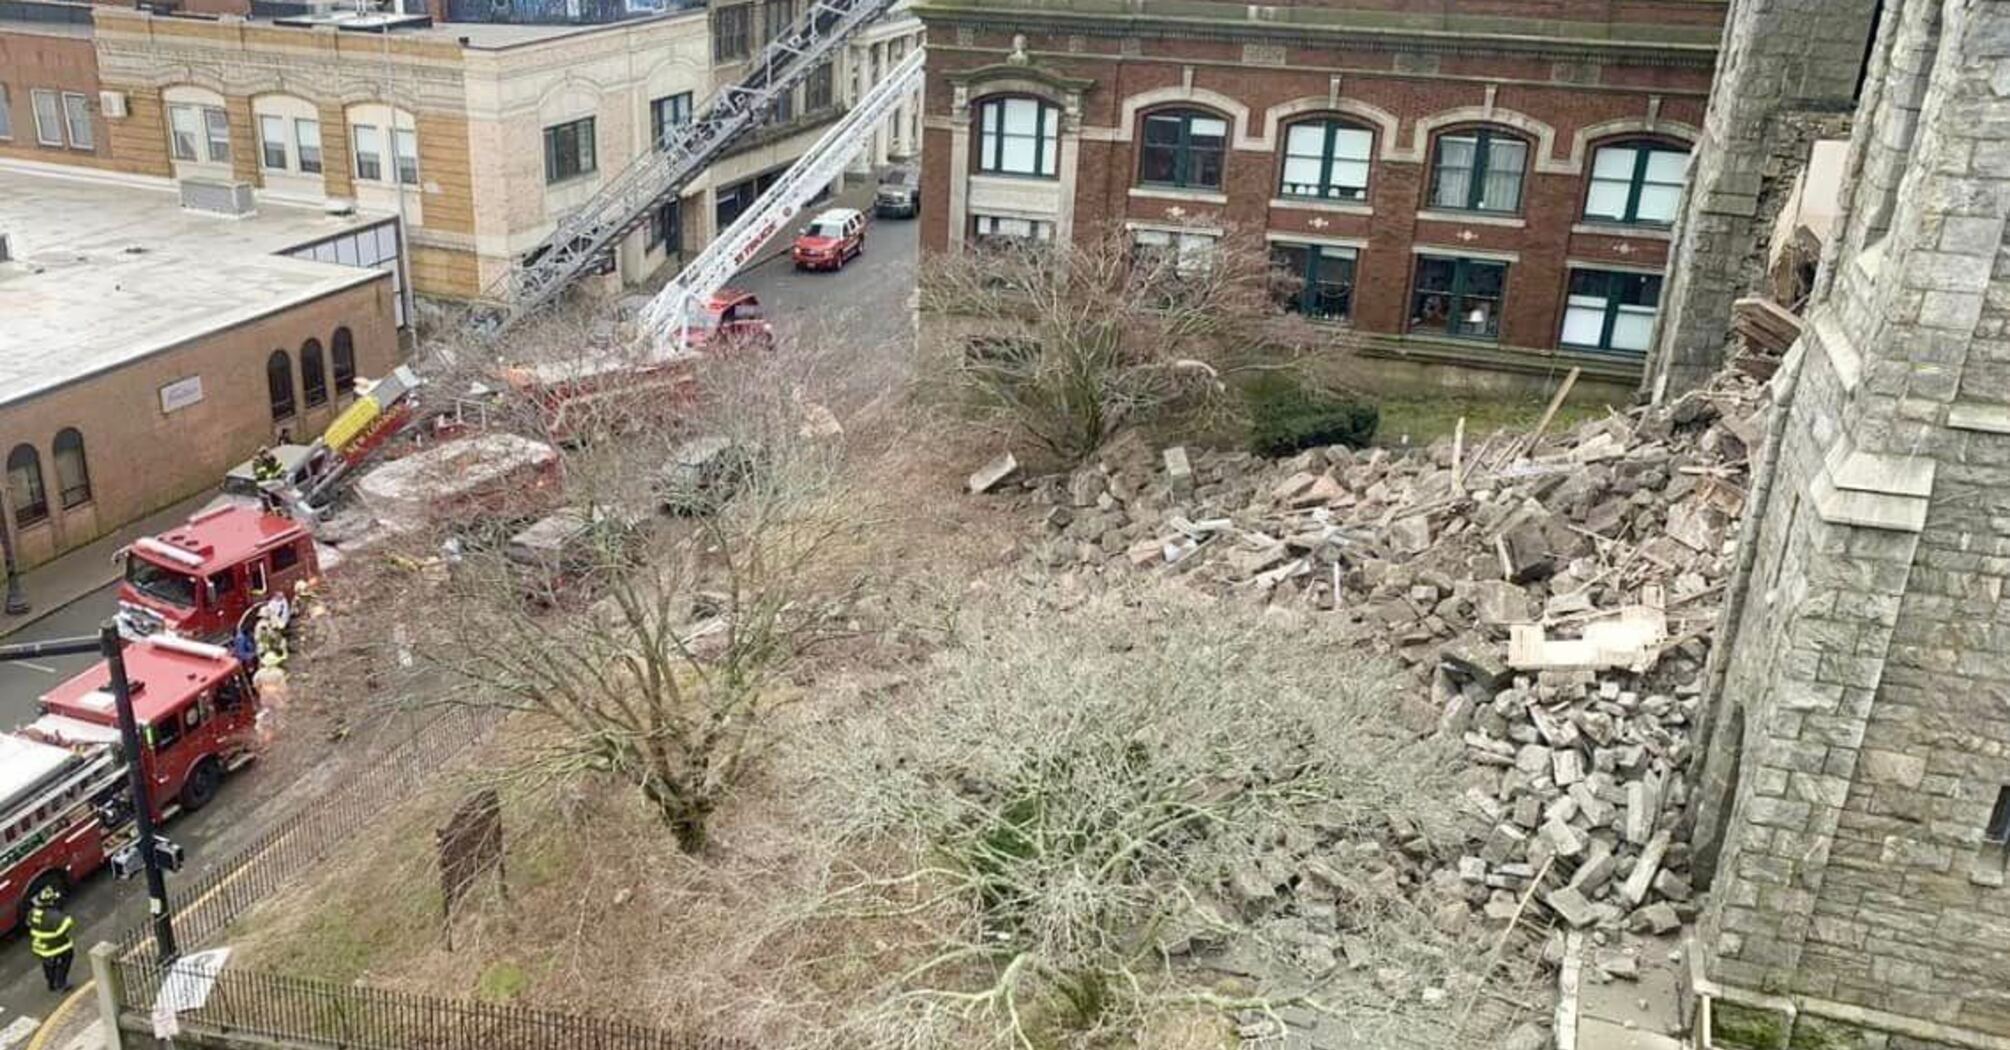 First Congregationalist Church bell tower collapses